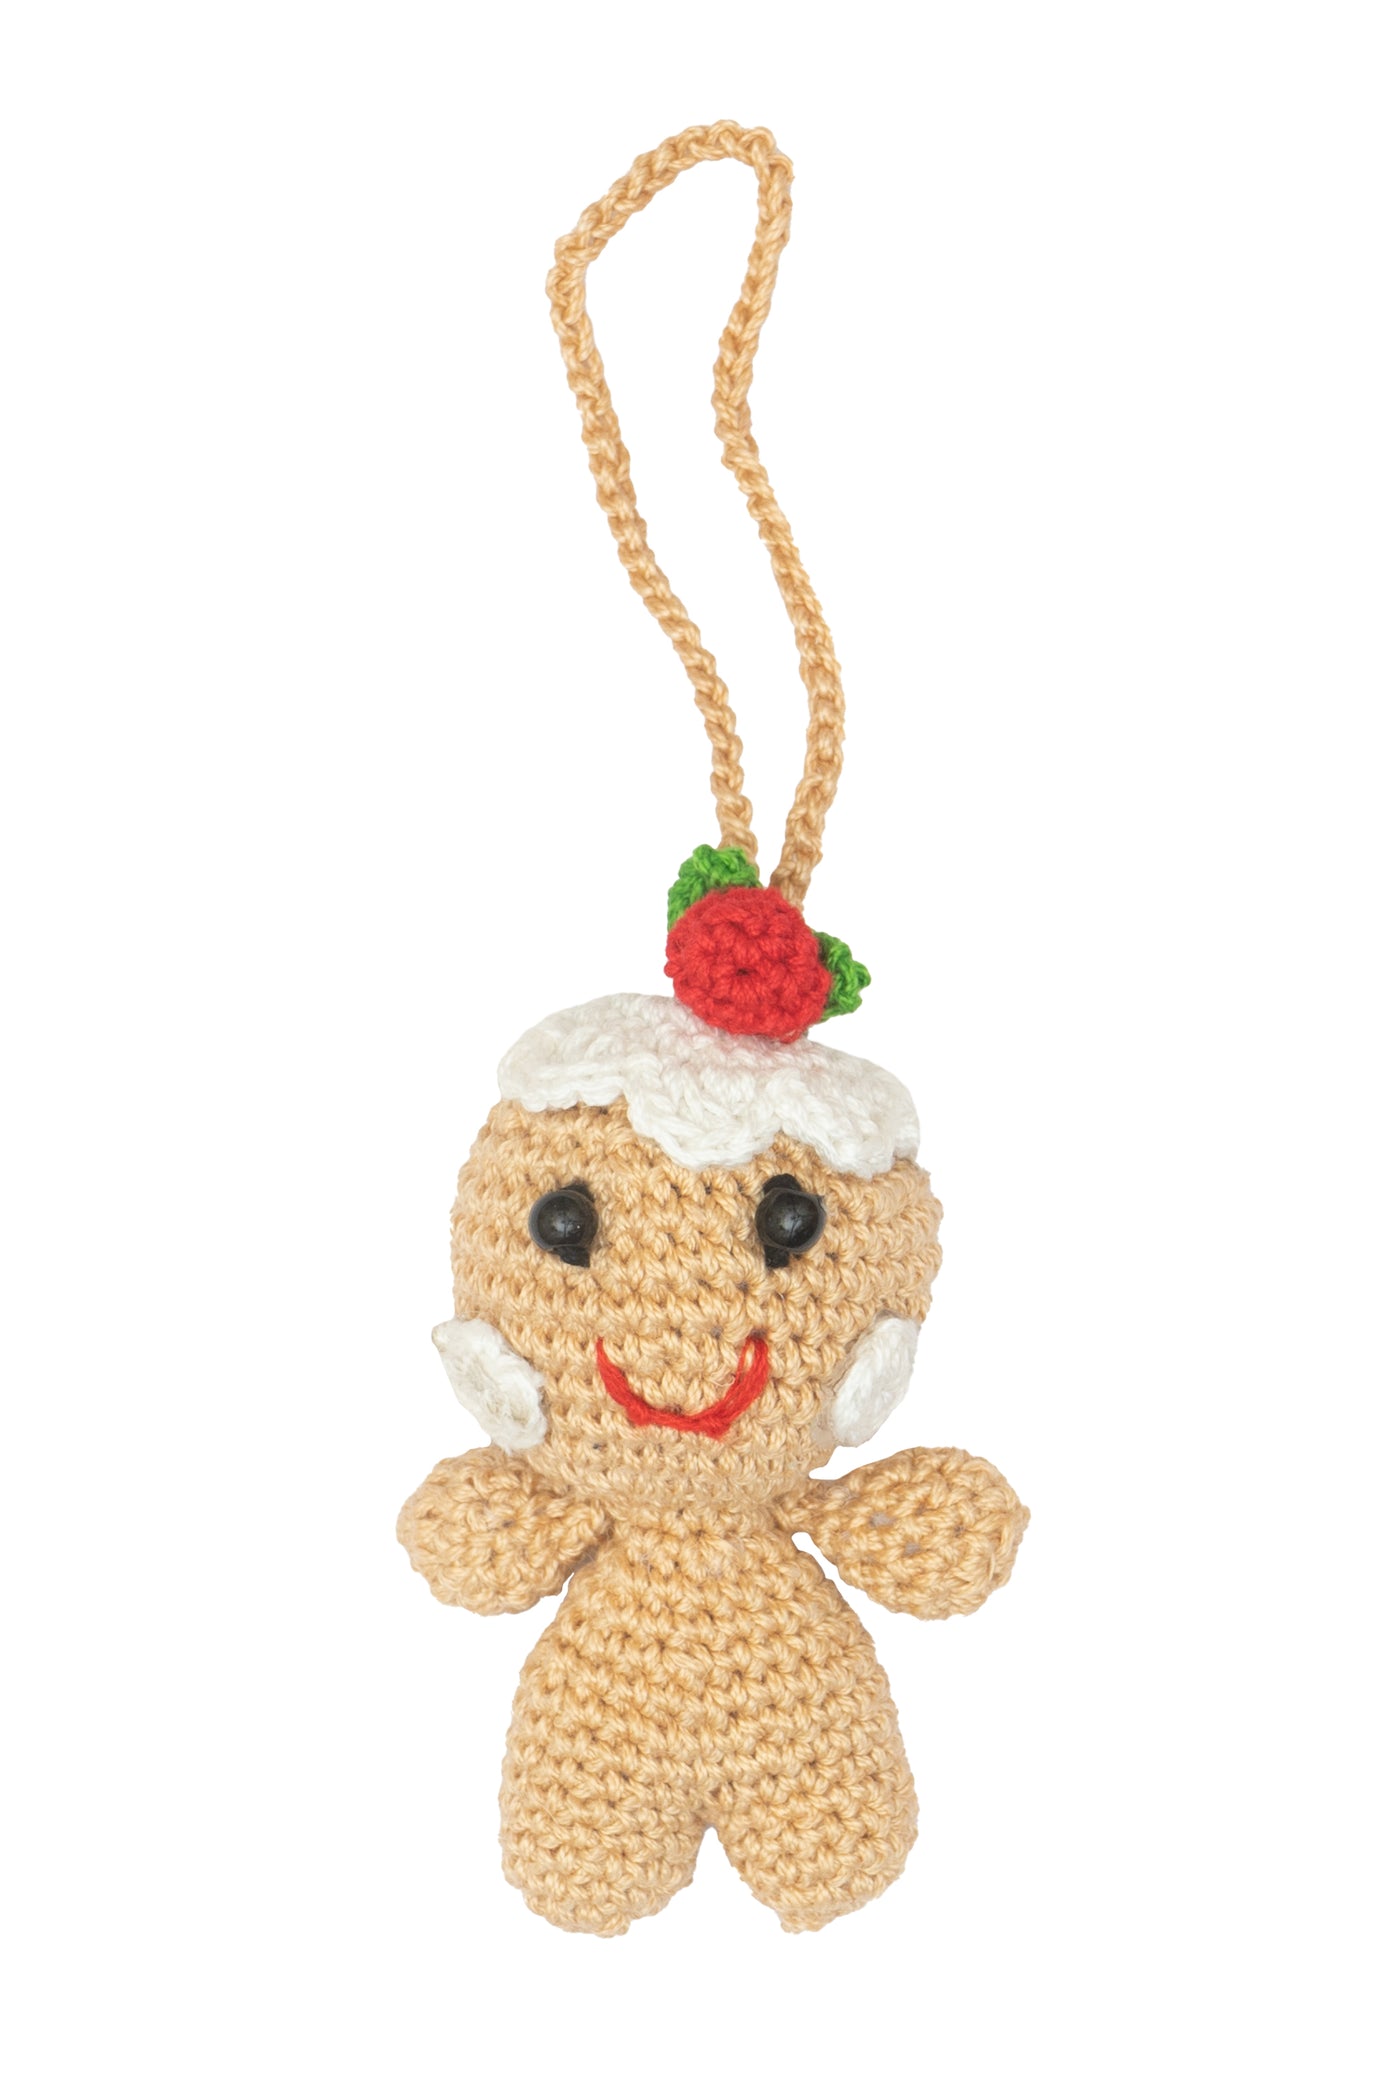 Handcrafted Crochet Christmas Tree Ornament- 3D Gingerbread man